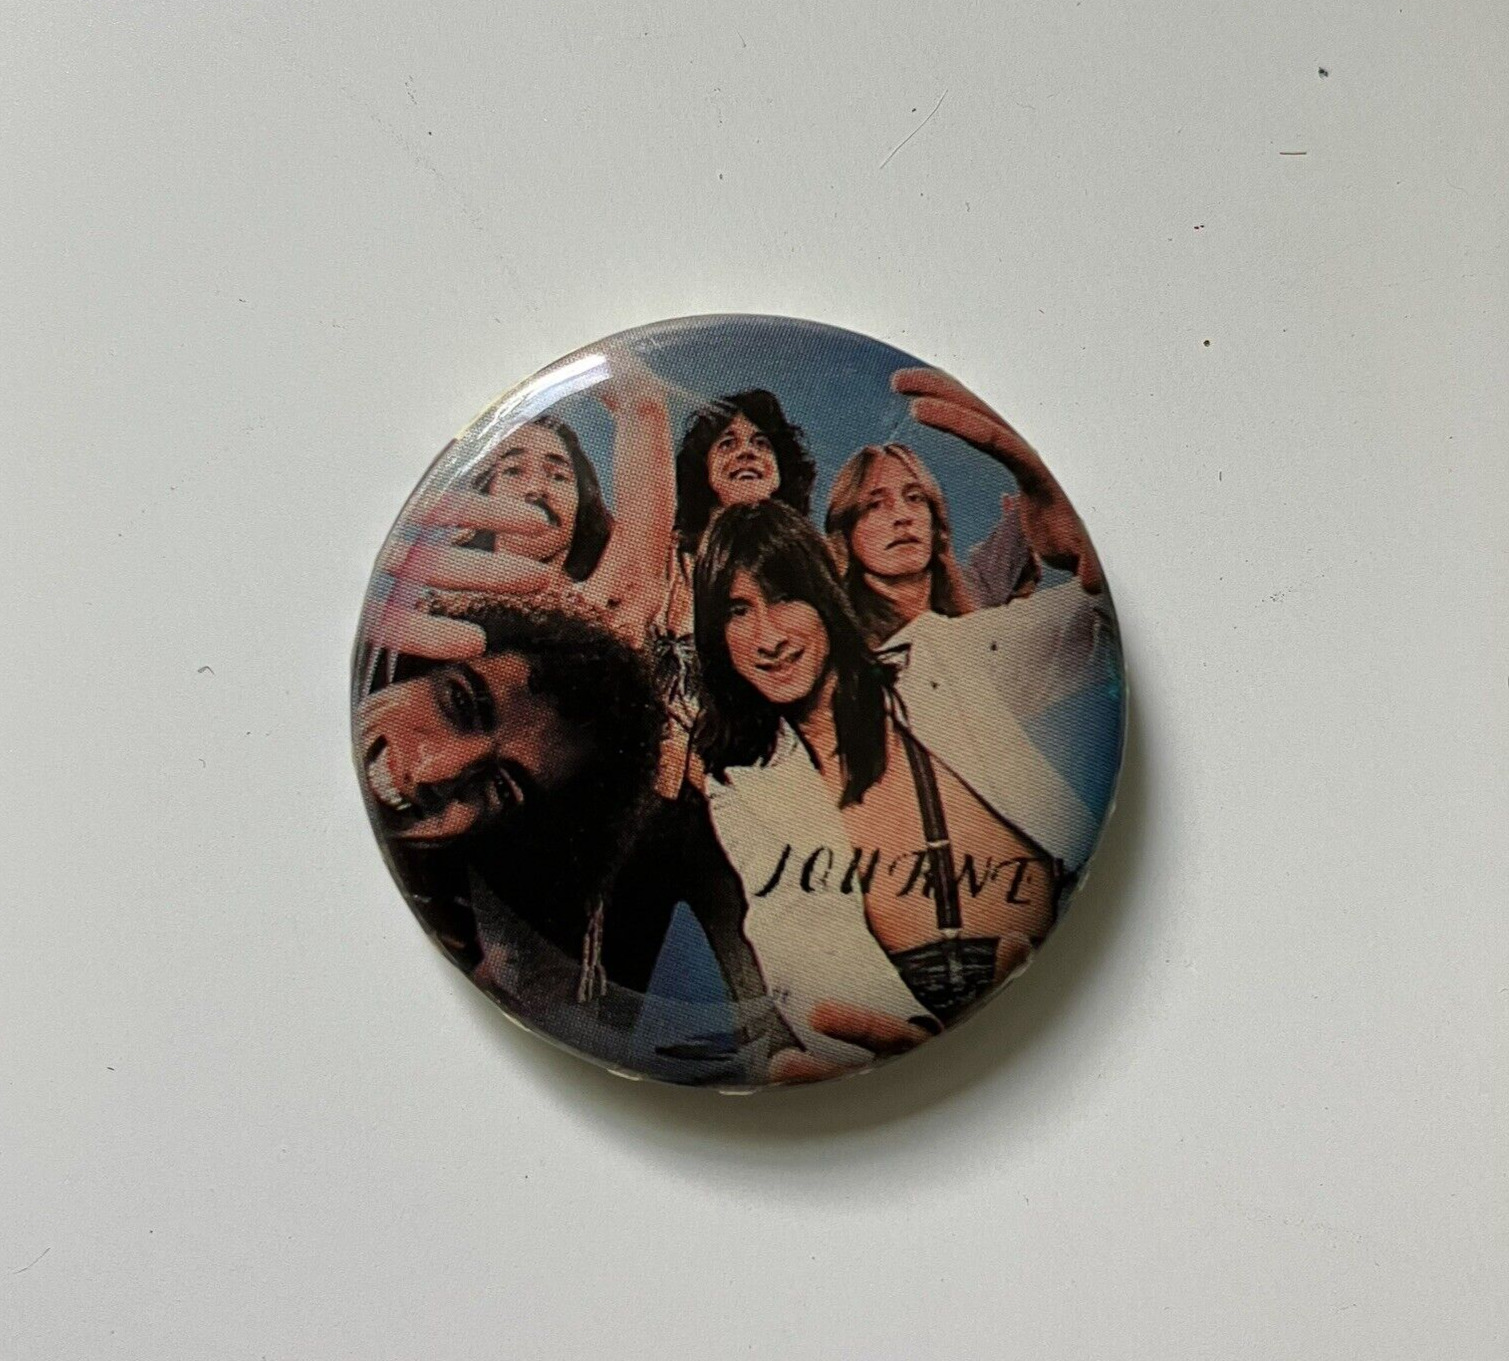 Vintage Button Pin Band Photo Journey Steve Perry